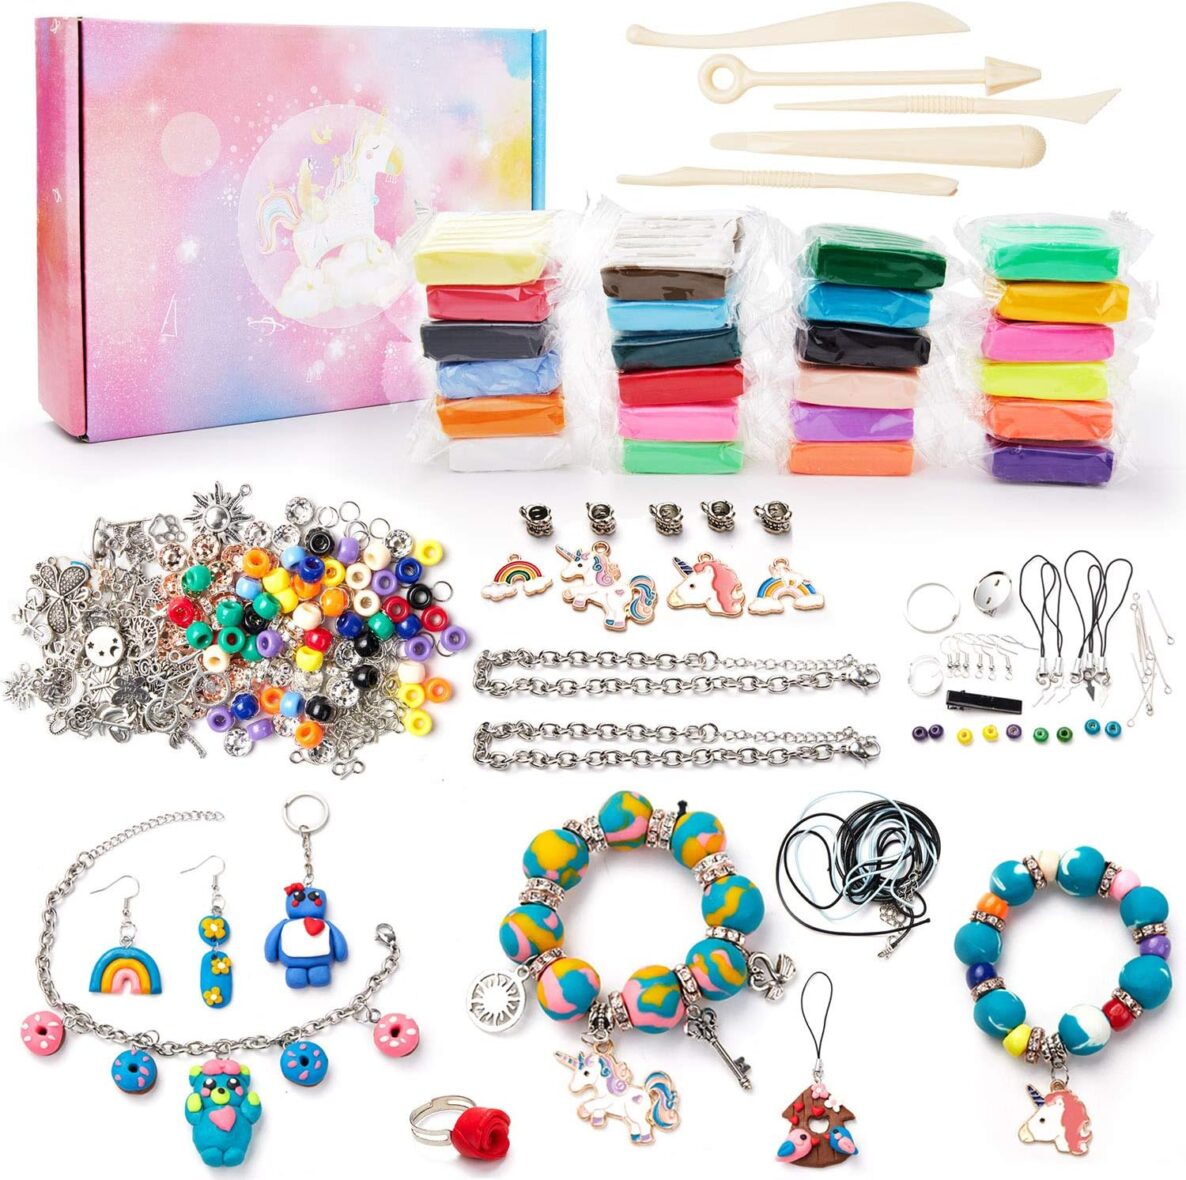 SWAKER Make Your Own Clay Jewelry – Clay Jewelry Making Craft Kit for Girls, Arts and Crafts for Kids Ages 8-12 and Up, Oven Bake Polymer Clay Kit